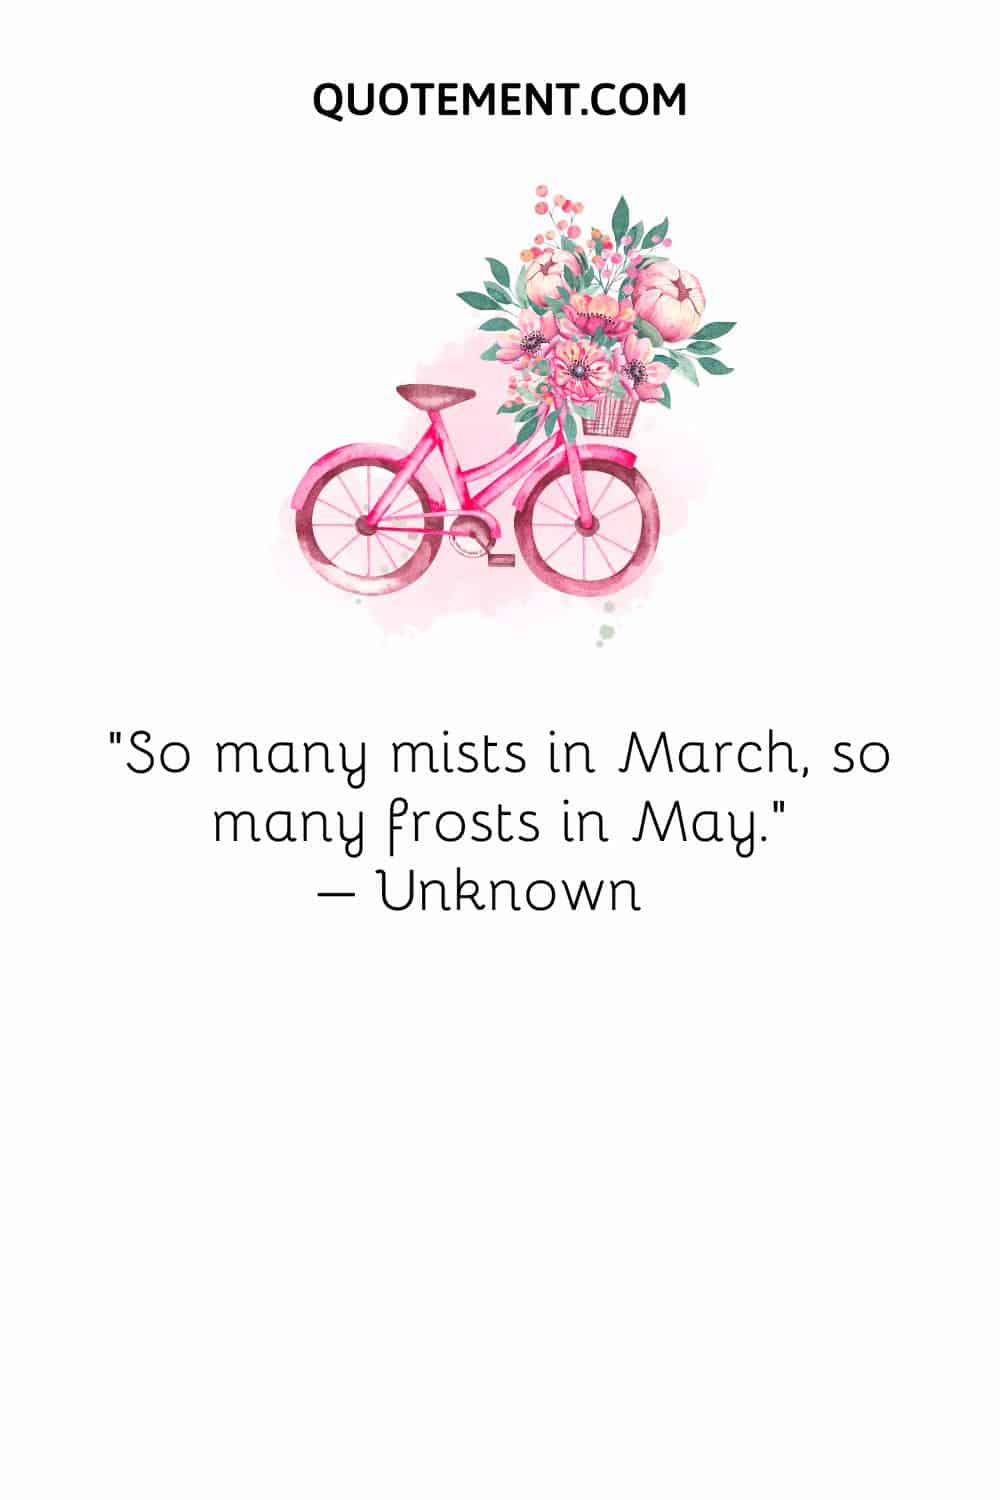 So many mists in March, so many frosts in May. – Unknown